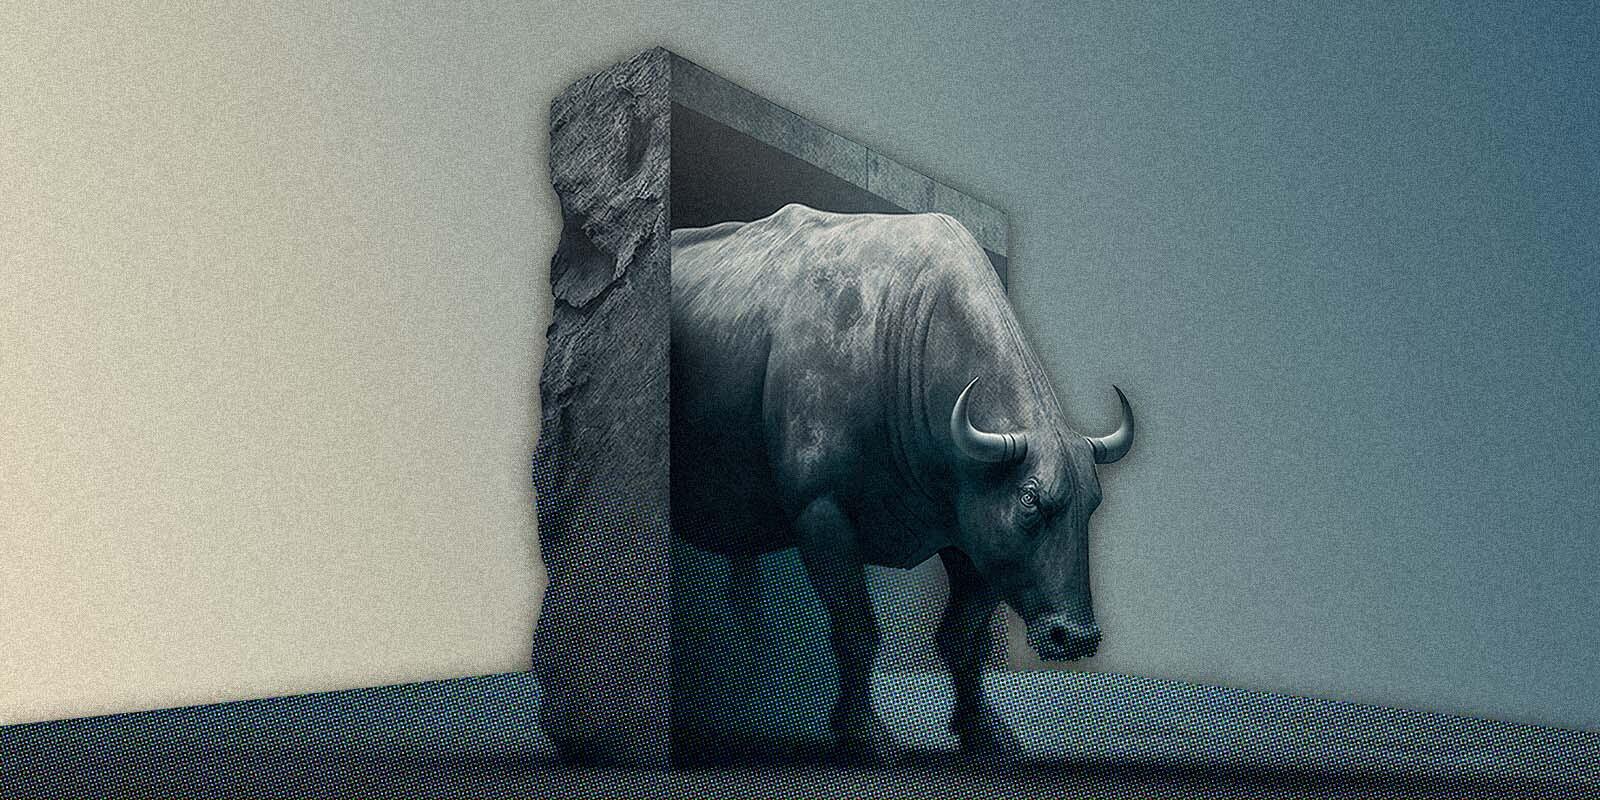 Stocks Could Be Headed For A New Bull Market